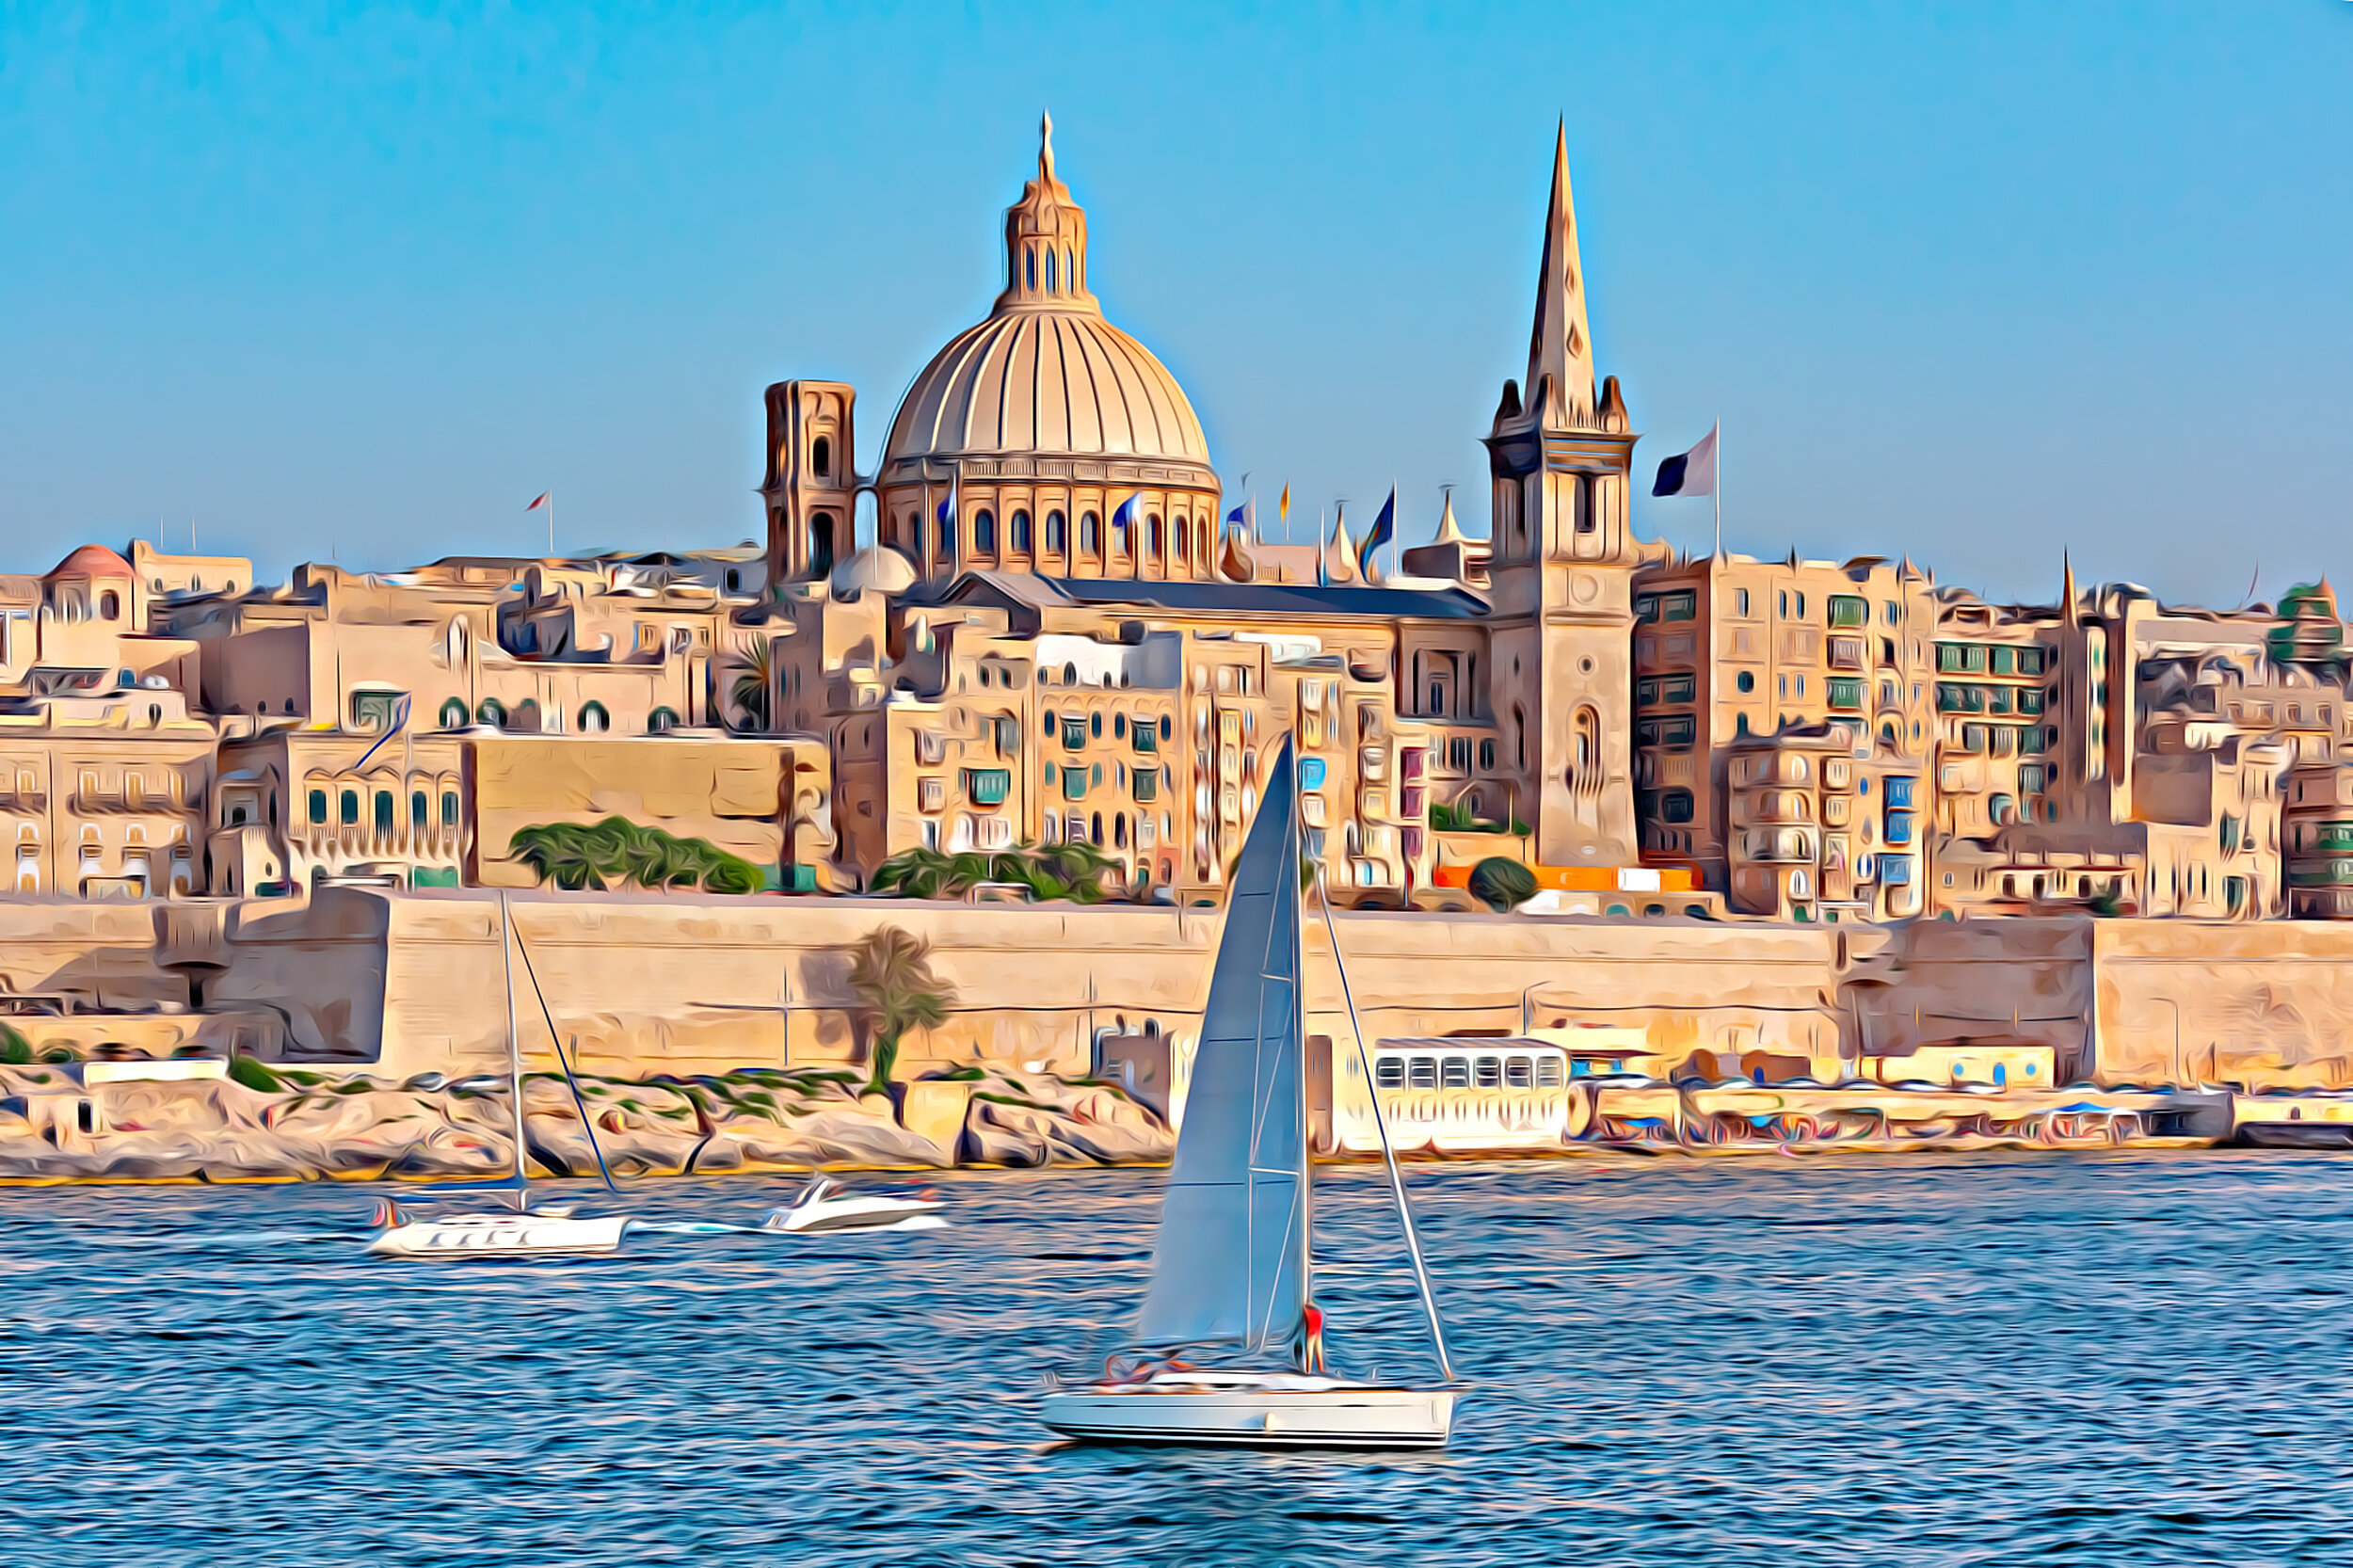 Valletta - the capital of Malta and a World Heritage Site